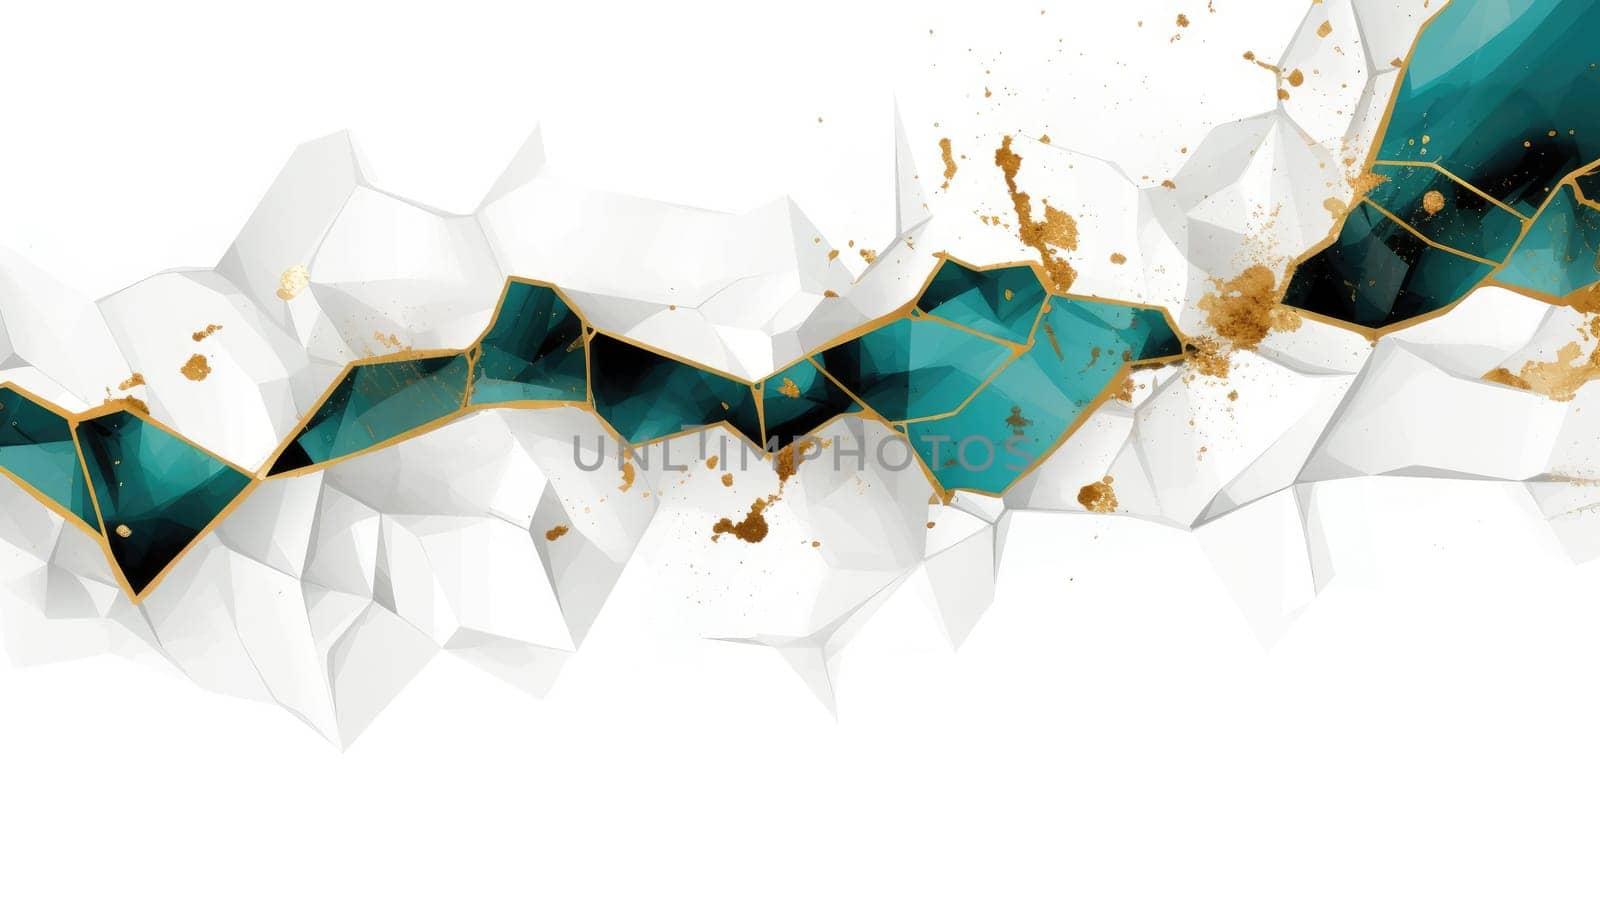 Abstract watercolor artwork mixed with buzzy geometric shapes by biancoblue